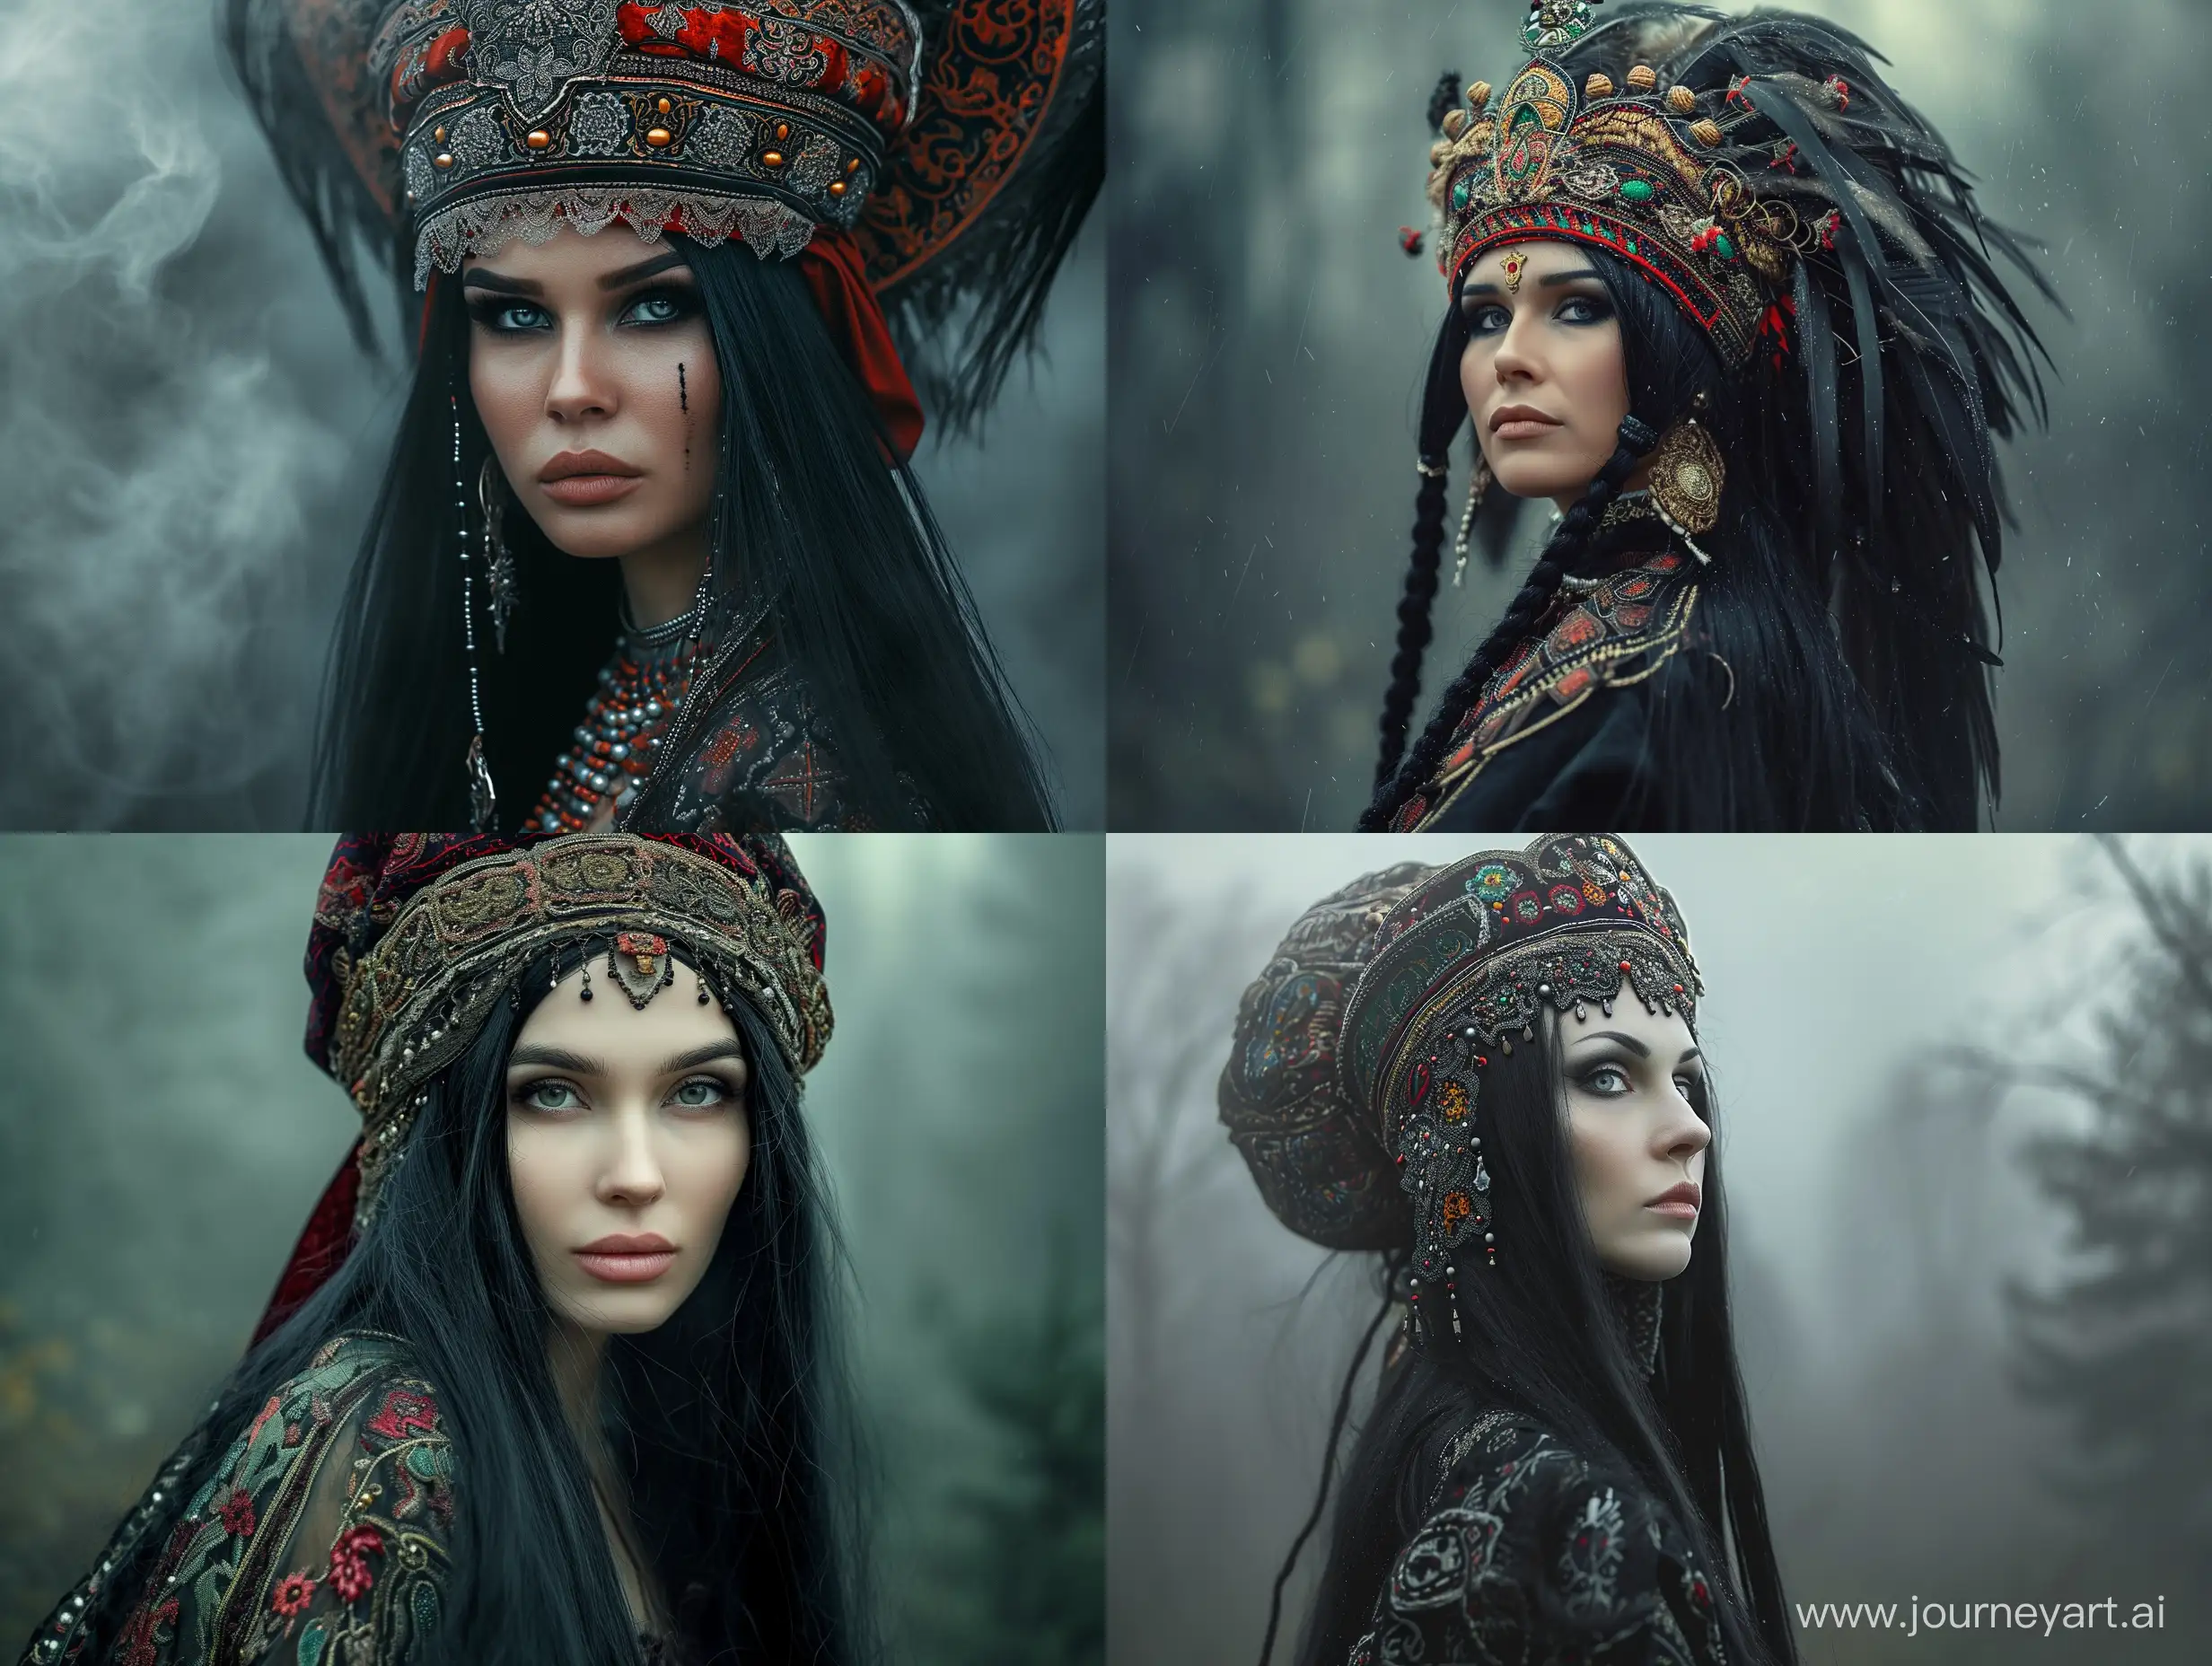 Russian Russian fairy tale Baba Yaga, a beautiful woman with long black hair and a  traditional russian headdress, a gloomy atmosphere, a Russian sorceress, mysticism, folklore